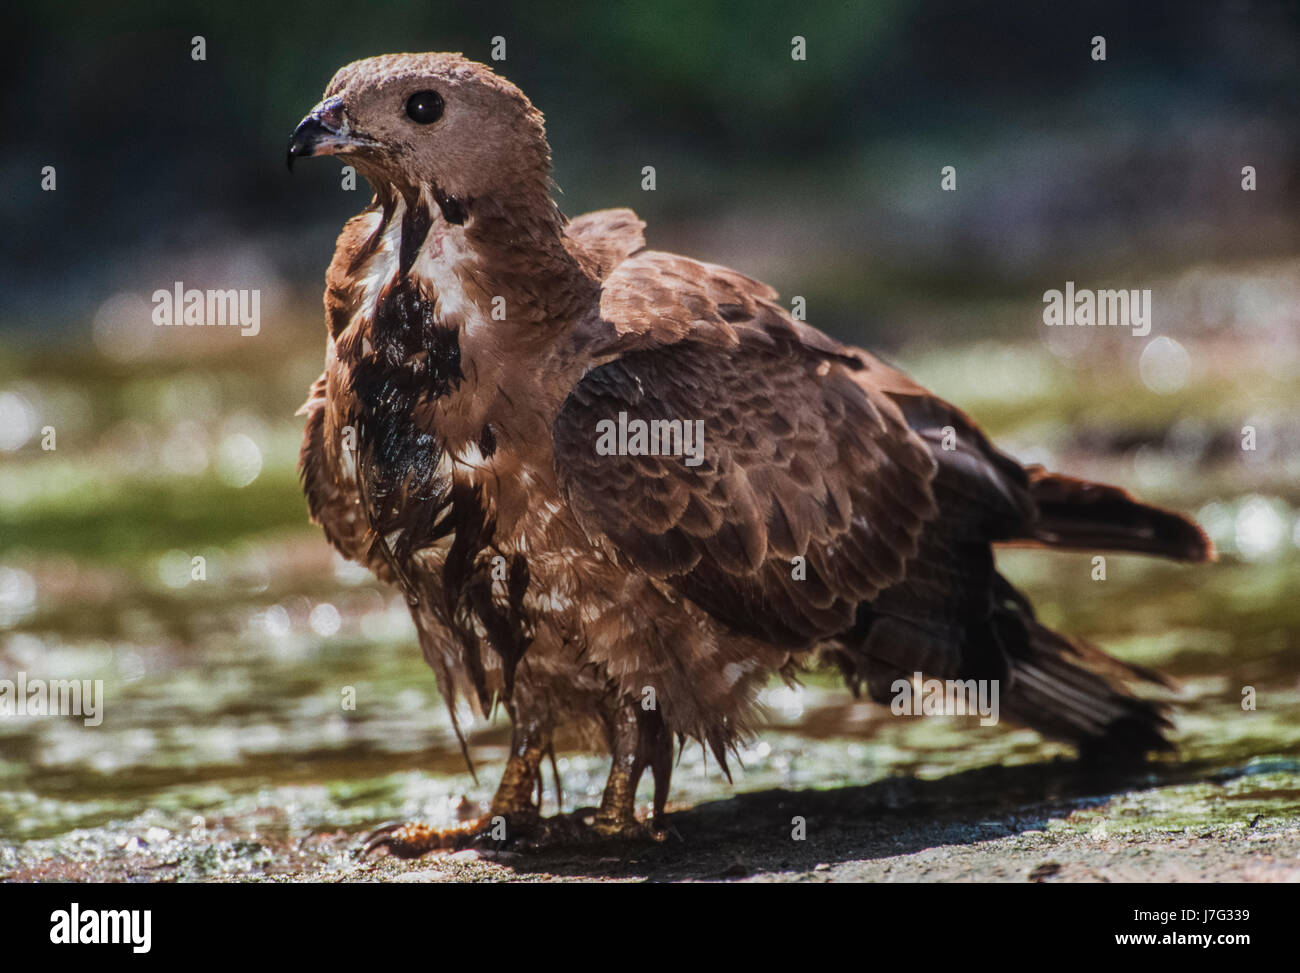 Oriental Honey Buzzard or Crested Honey Buzzard, Pernis ptilorhynchus, cooling down with water bath, Keoladeo Ghana National Park,Bharatpur, Rajasthan Stock Photo